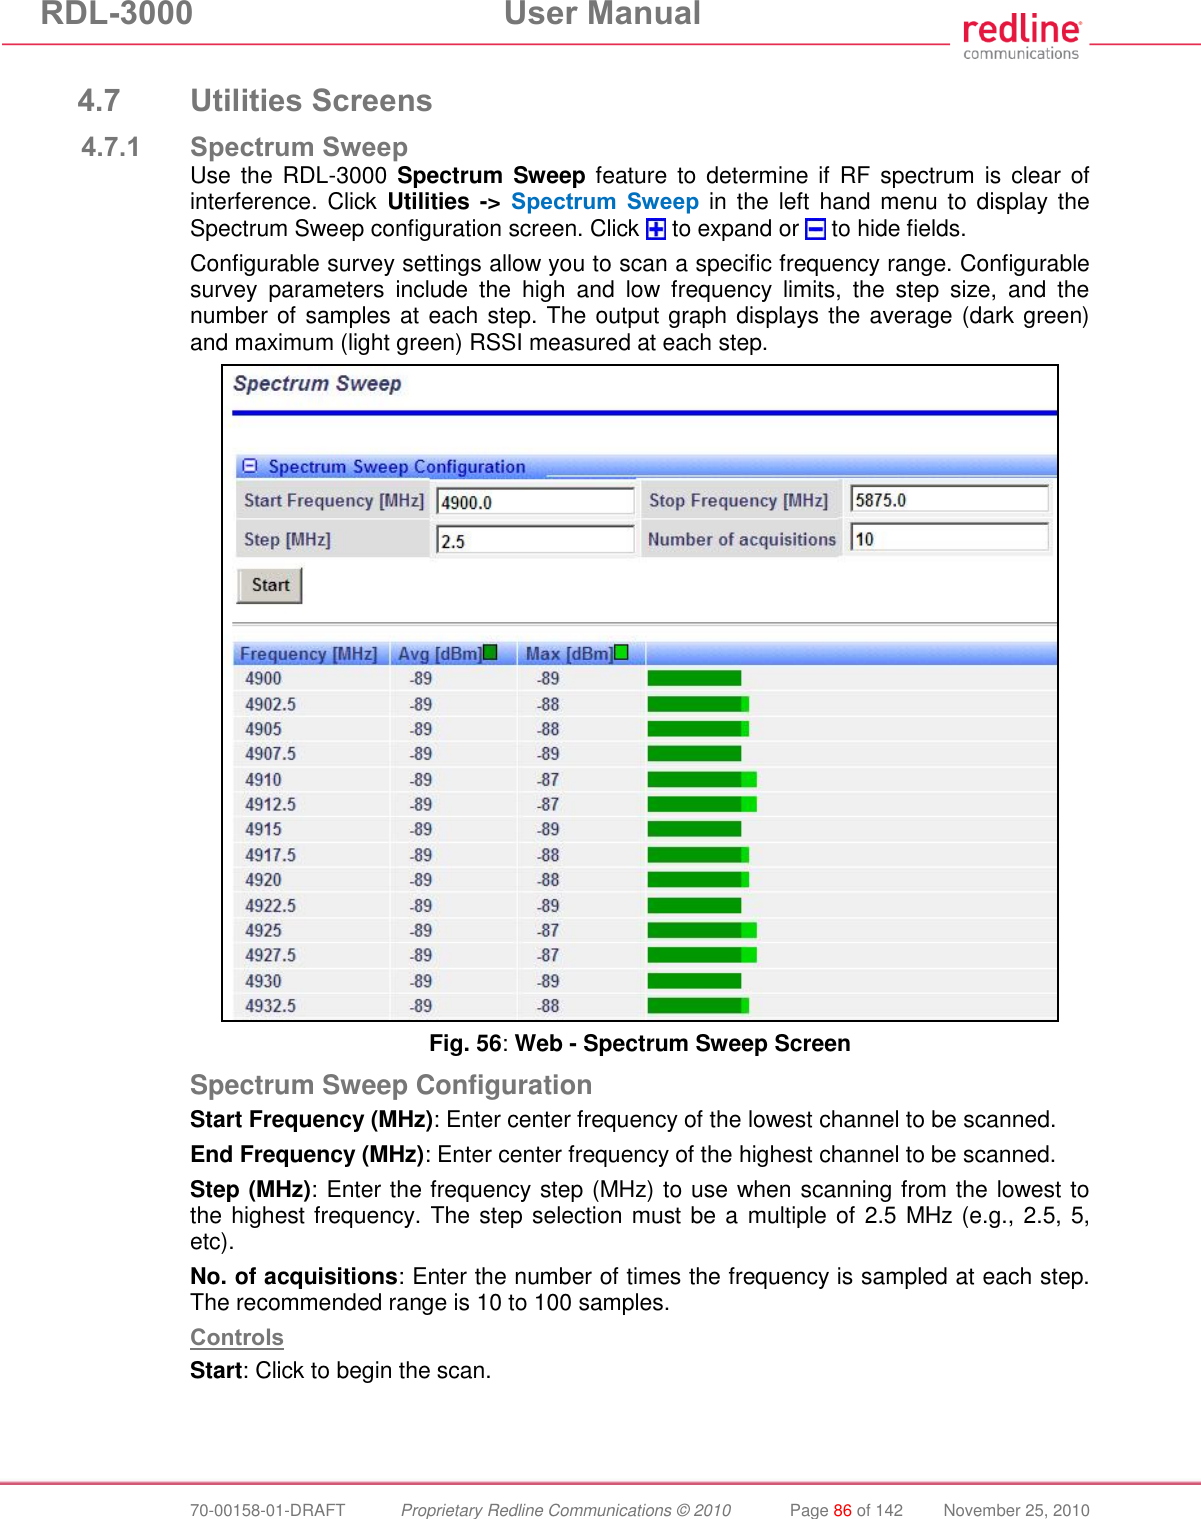 RDL-3000  User Manual  70-00158-01-DRAFT  Proprietary Redline Communications © 2010  Page 86 of 142  November 25, 2010  4.7 Utilities Screens 4.7.1 Spectrum Sweep Use the  RDL-3000  Spectrum Sweep feature  to  determine if  RF  spectrum  is  clear of interference. Click  Utilities -&gt; Spectrum  Sweep in the  left  hand menu to  display the Spectrum Sweep configuration screen. Click   to expand or   to hide fields. Configurable survey settings allow you to scan a specific frequency range. Configurable survey  parameters  include  the  high  and  low  frequency  limits,  the  step  size,  and  the number of samples at each step. The output graph displays the average (dark green) and maximum (light green) RSSI measured at each step.  Fig. 56: Web - Spectrum Sweep Screen  Spectrum Sweep Configuration Start Frequency (MHz): Enter center frequency of the lowest channel to be scanned. End Frequency (MHz): Enter center frequency of the highest channel to be scanned.  Step (MHz): Enter the frequency step (MHz) to use when scanning from the lowest to the highest frequency. The step selection must be a multiple of 2.5 MHz (e.g., 2.5, 5, etc). No. of acquisitions: Enter the number of times the frequency is sampled at each step. The recommended range is 10 to 100 samples.  Controls Start: Click to begin the scan. 